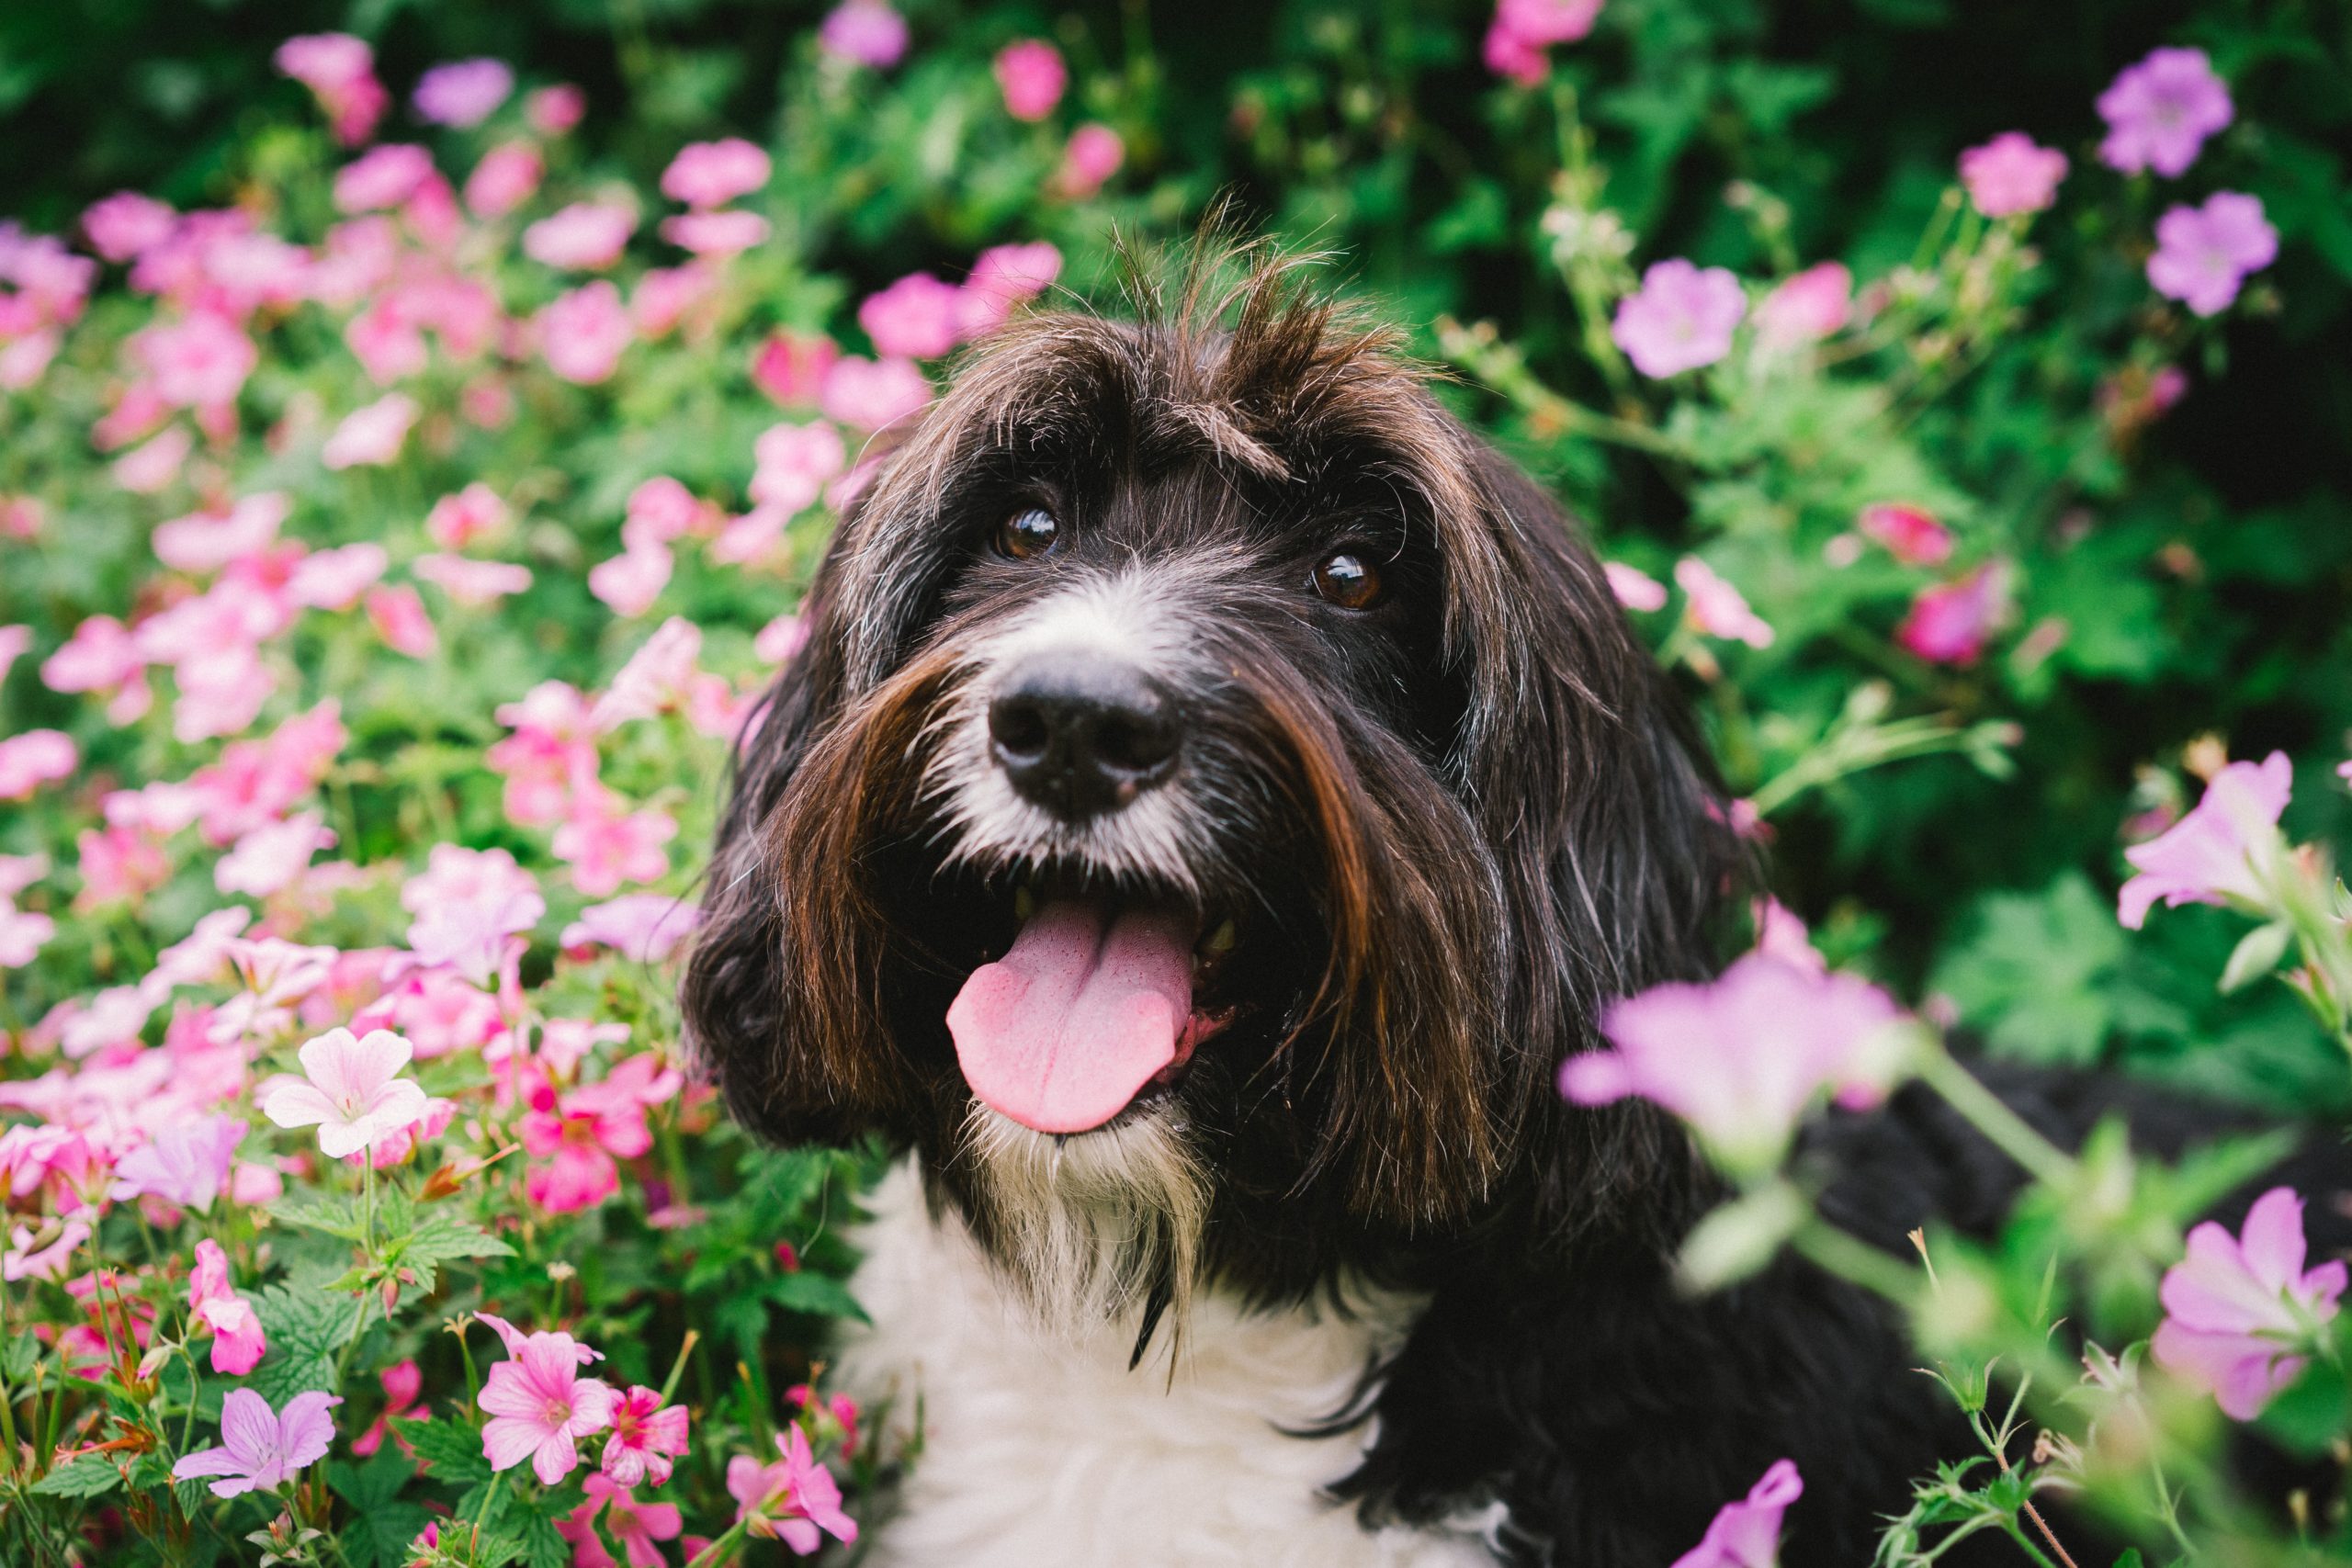 A dog sitting in garden surrounded by flowers.